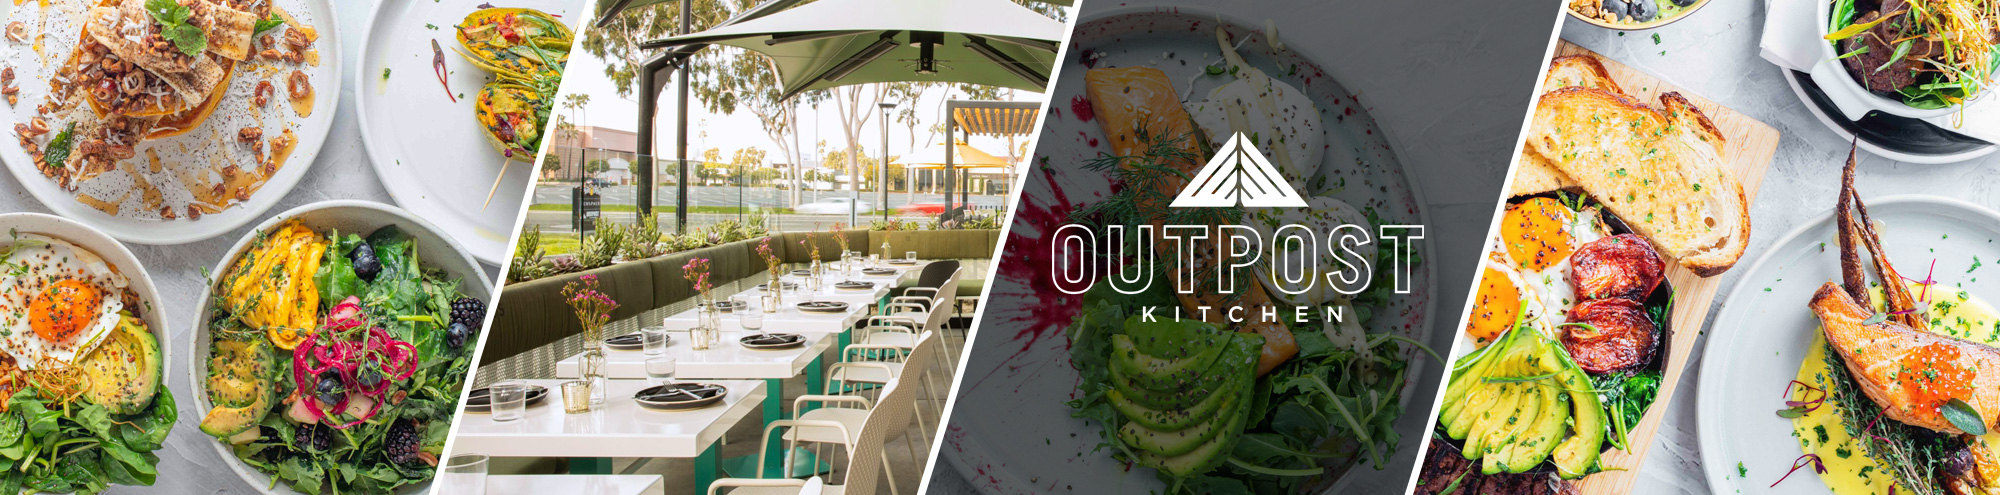 Outpost Kitchen at South Coast Plaza